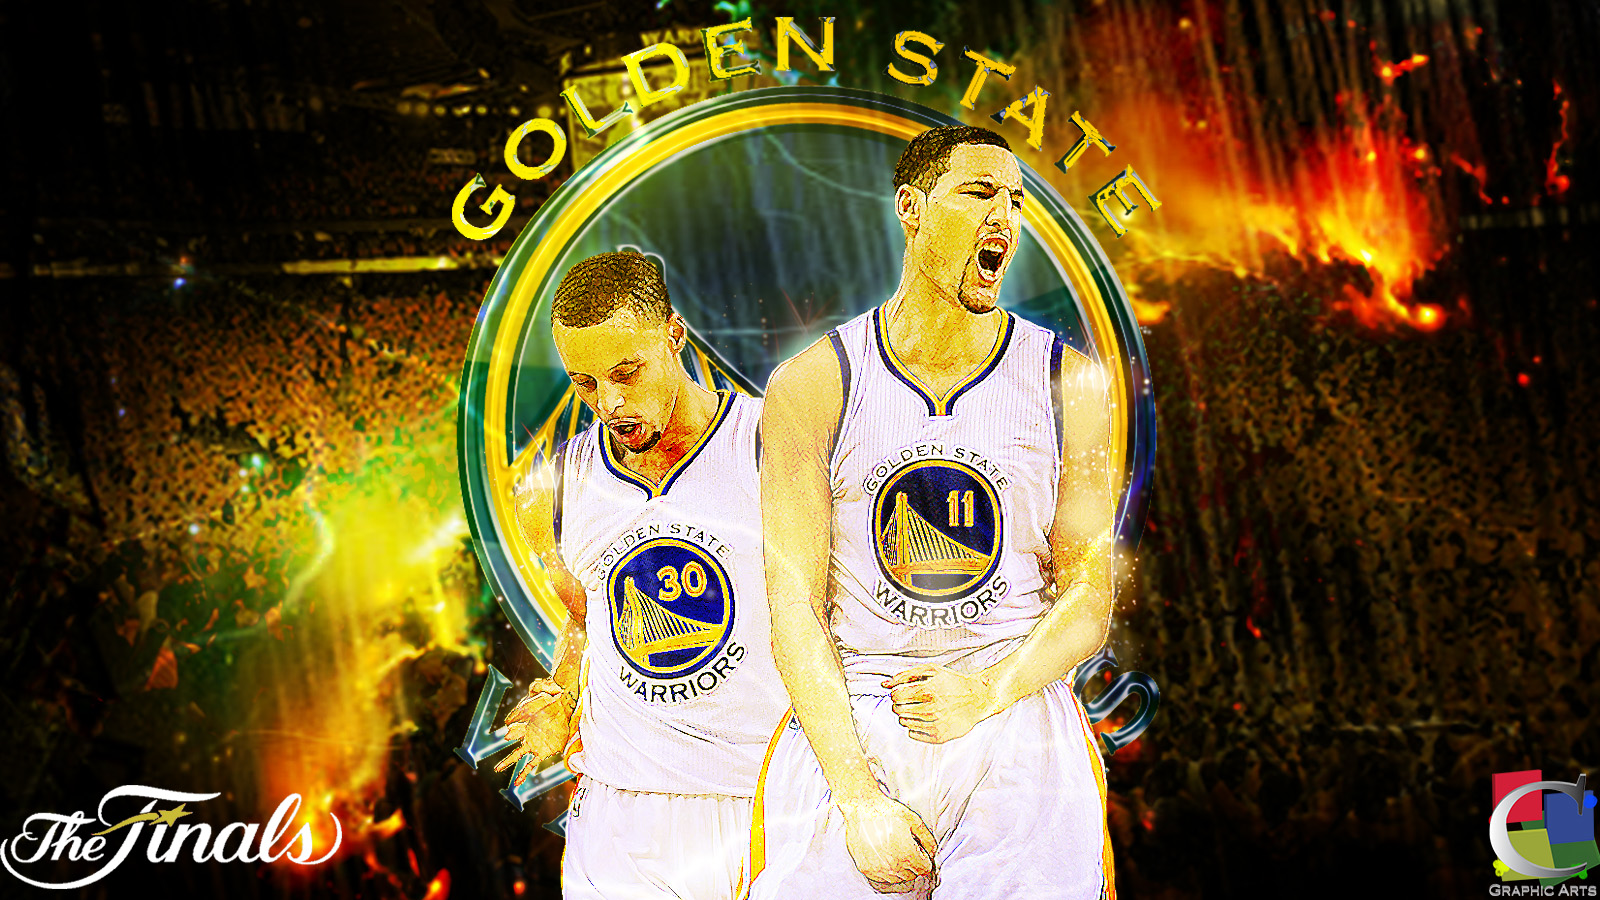 Golden State wallpaper by CGraphicArts on DeviantArt